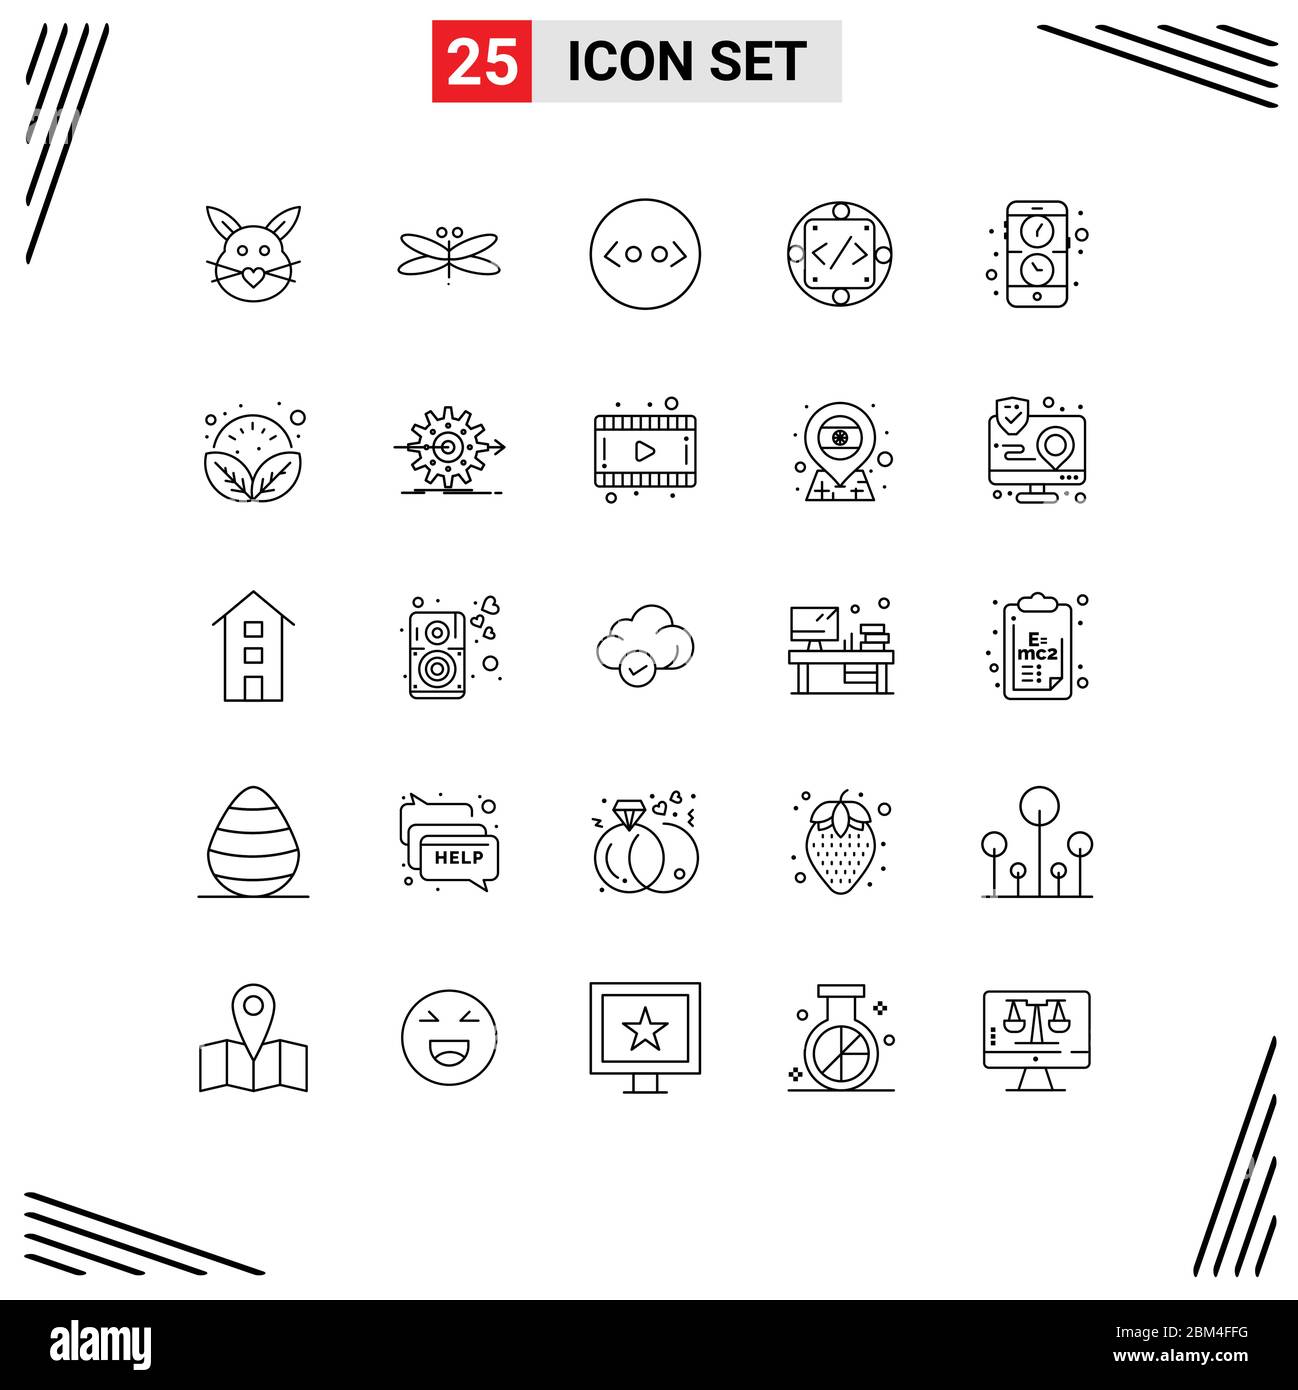 25 Creative Icons Modern Signs and Symbols of produc, implementation, fly, custom, html Editable Vector Design Elements Stock Vector